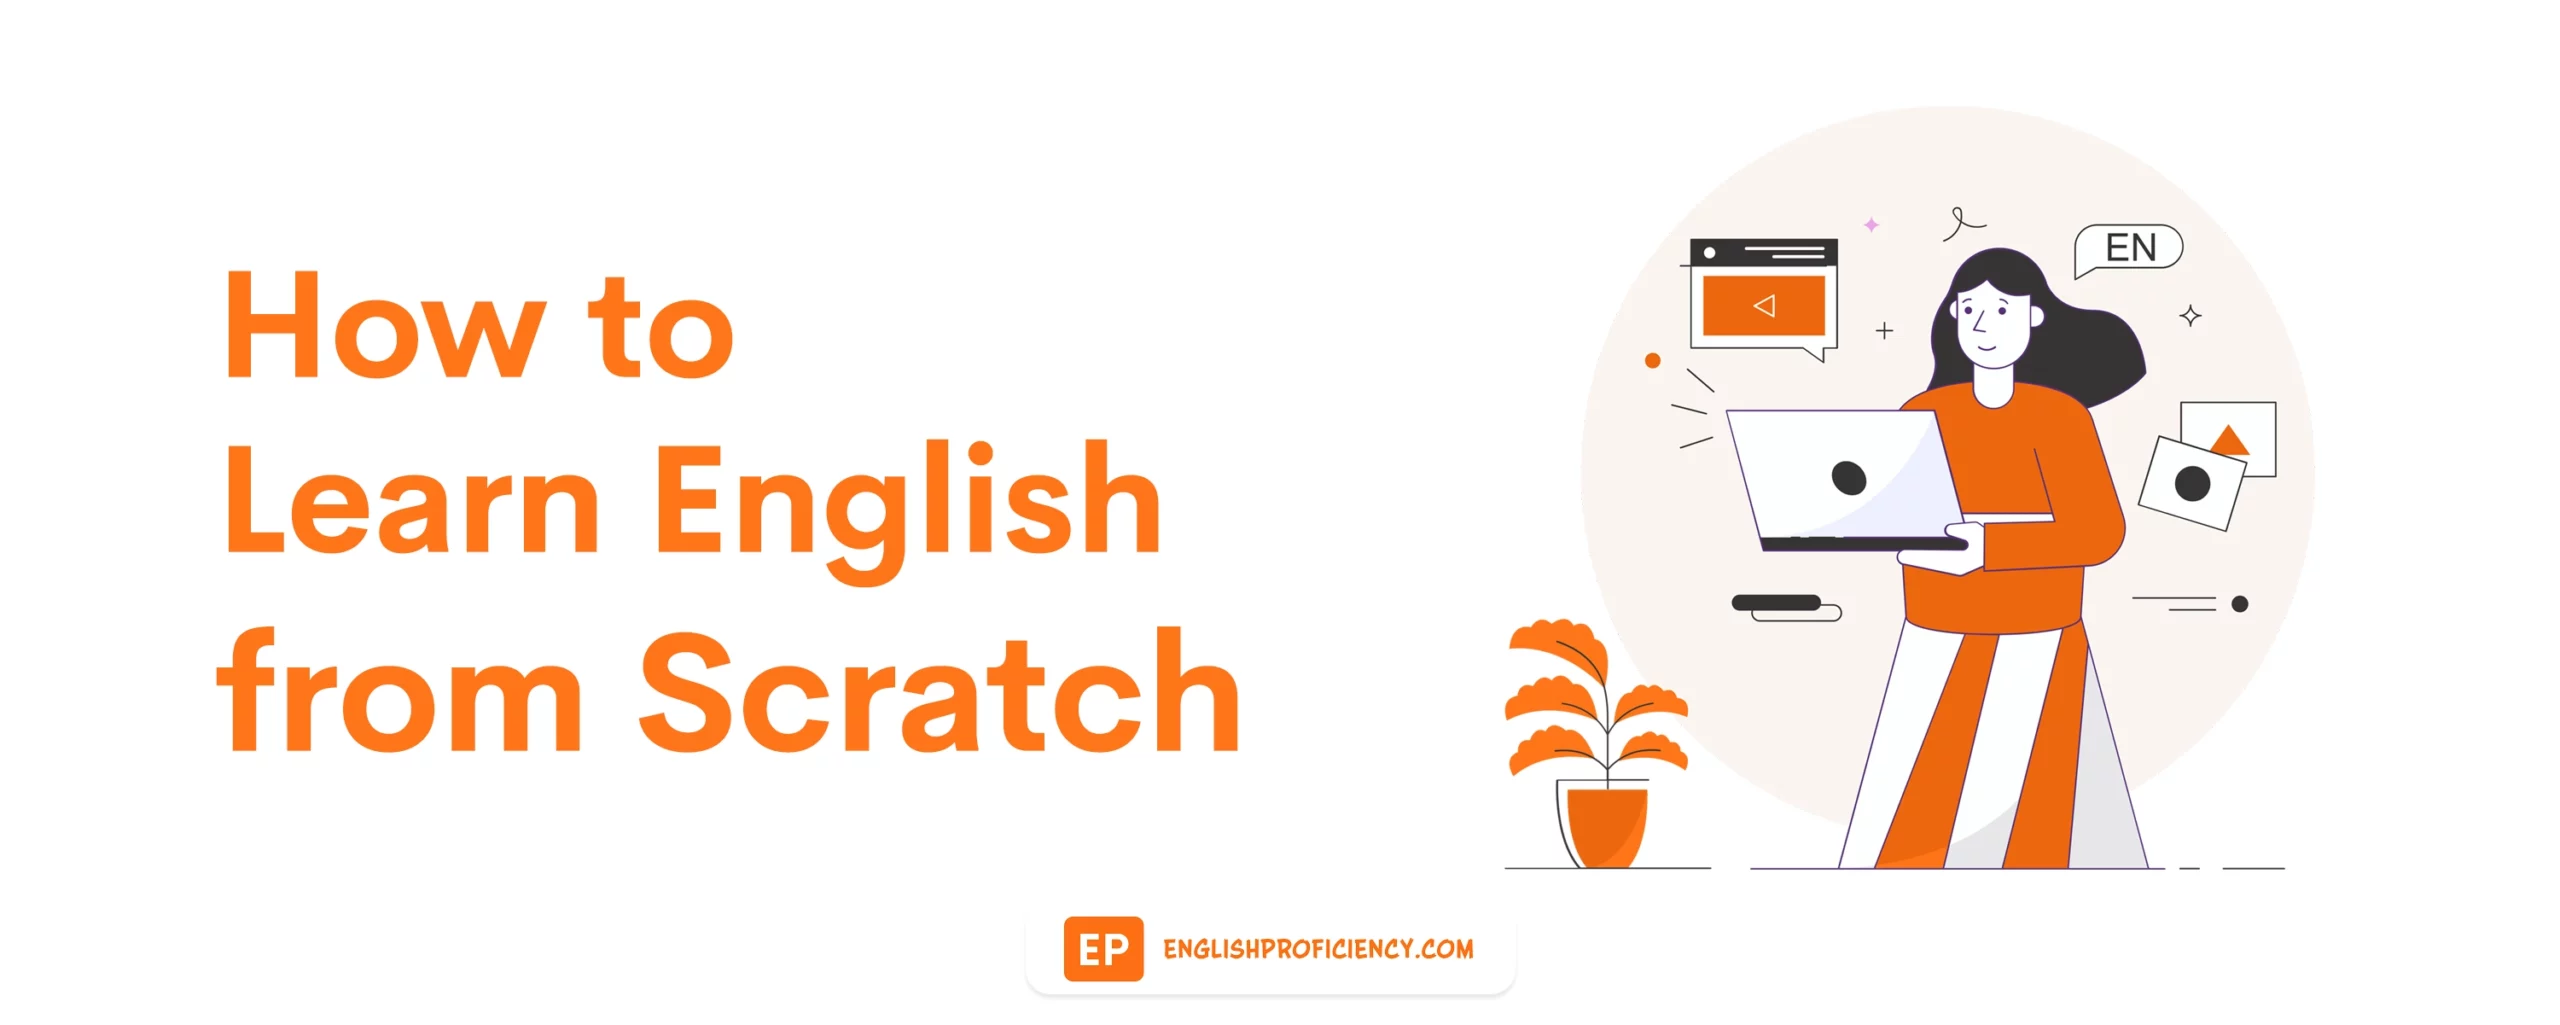 How to Learn English from Scratch